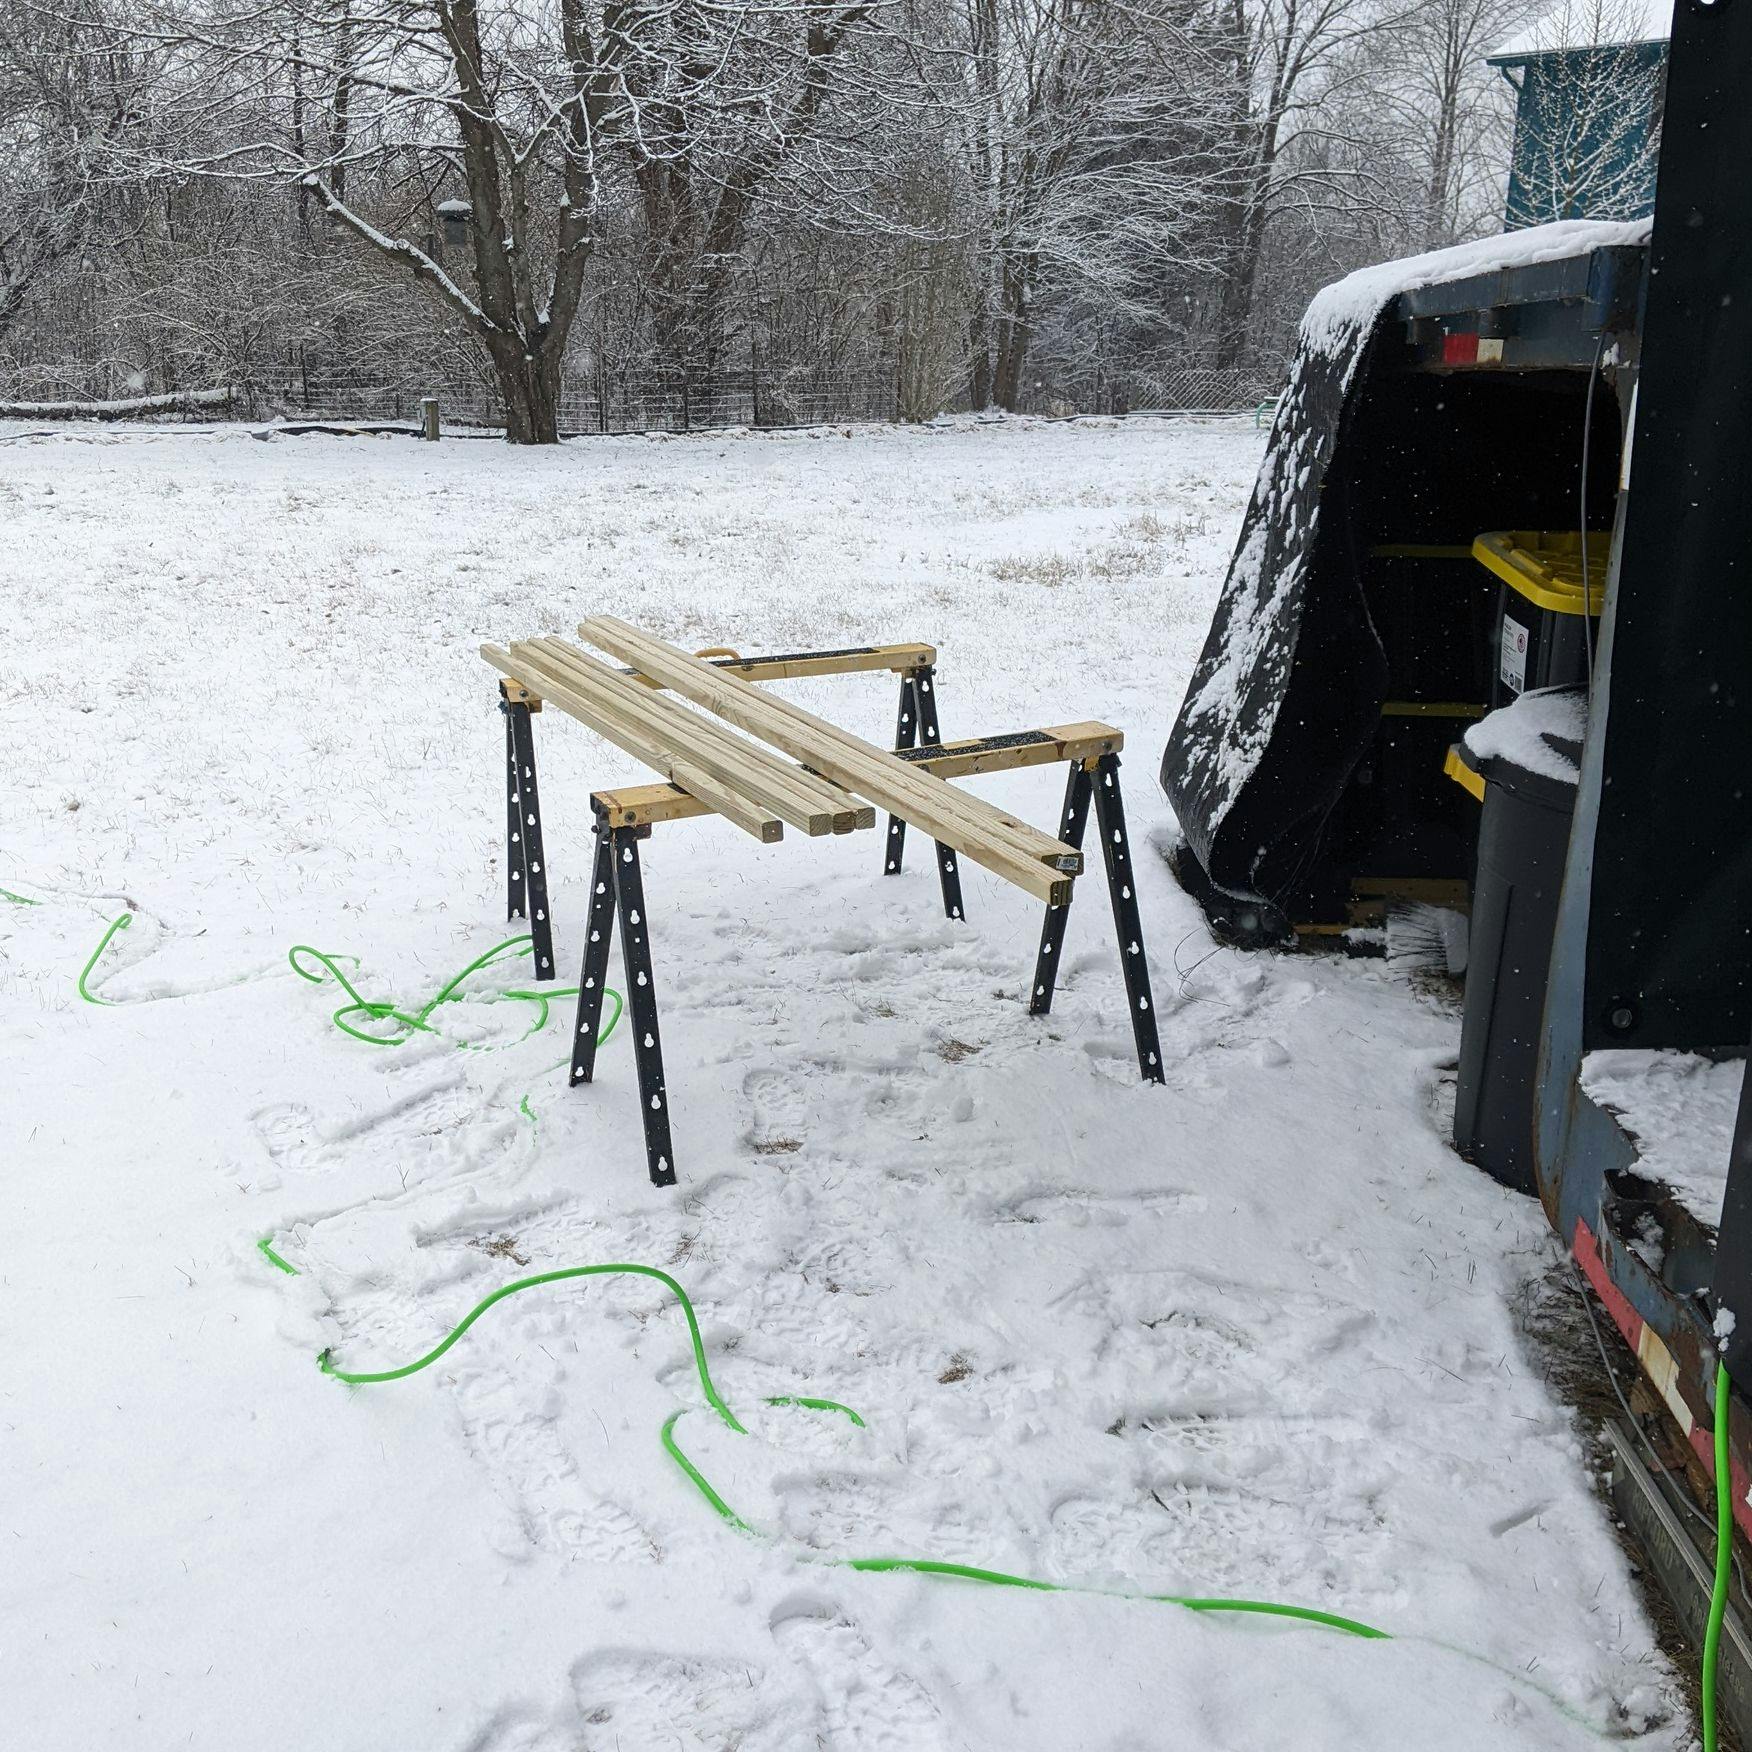 Sawhorses in the snow next to the tiny home with some 2x2s on them. The landlords snowy yard in the background